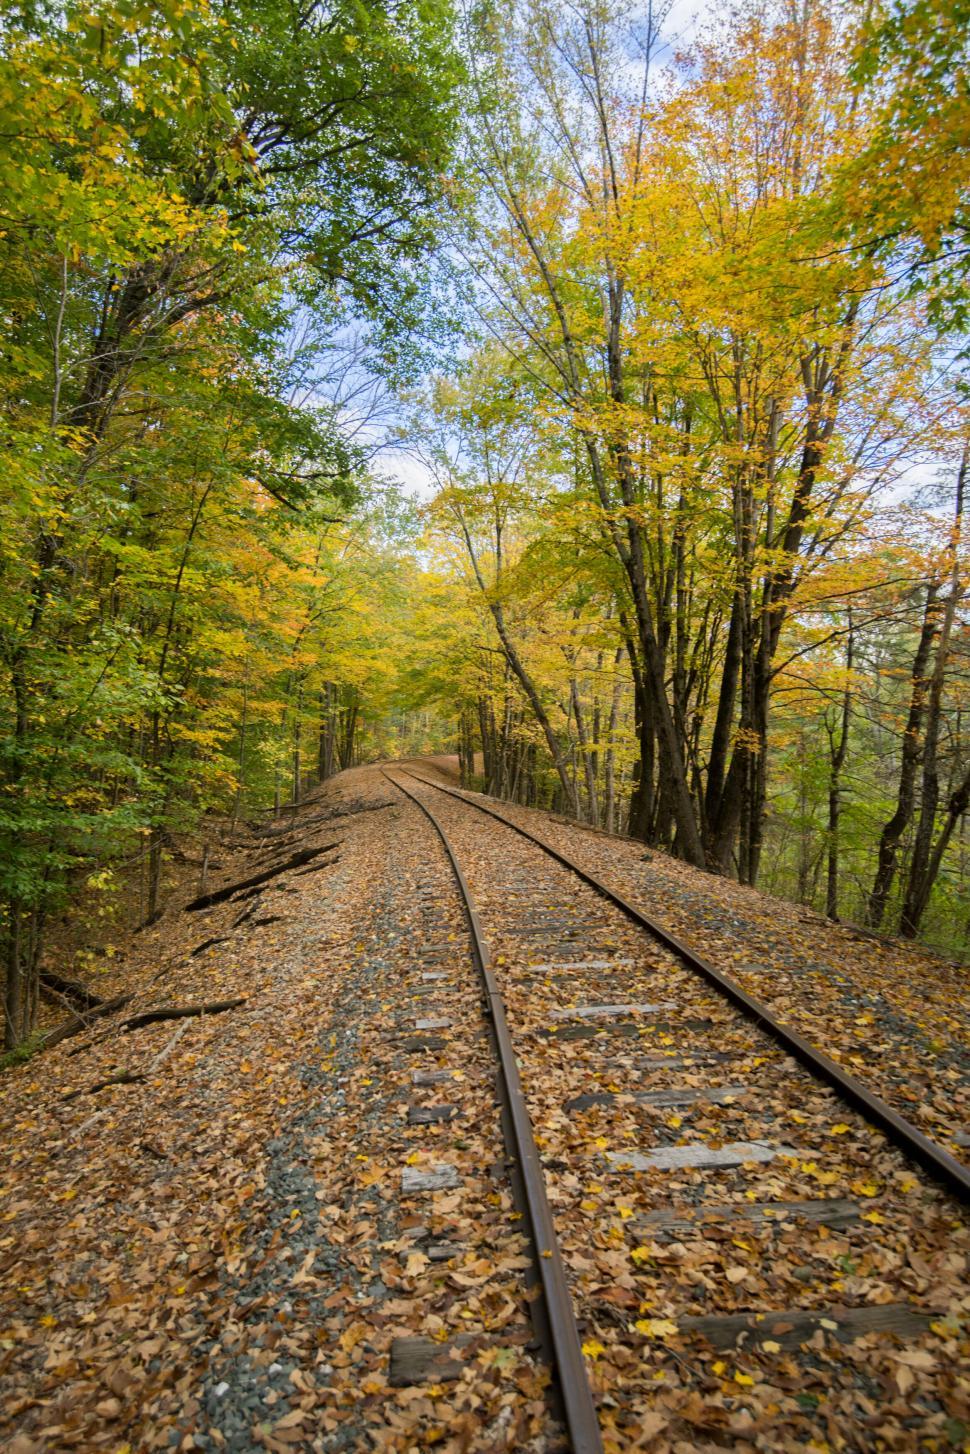 Free Image of Autumn railway path in a forest setting 